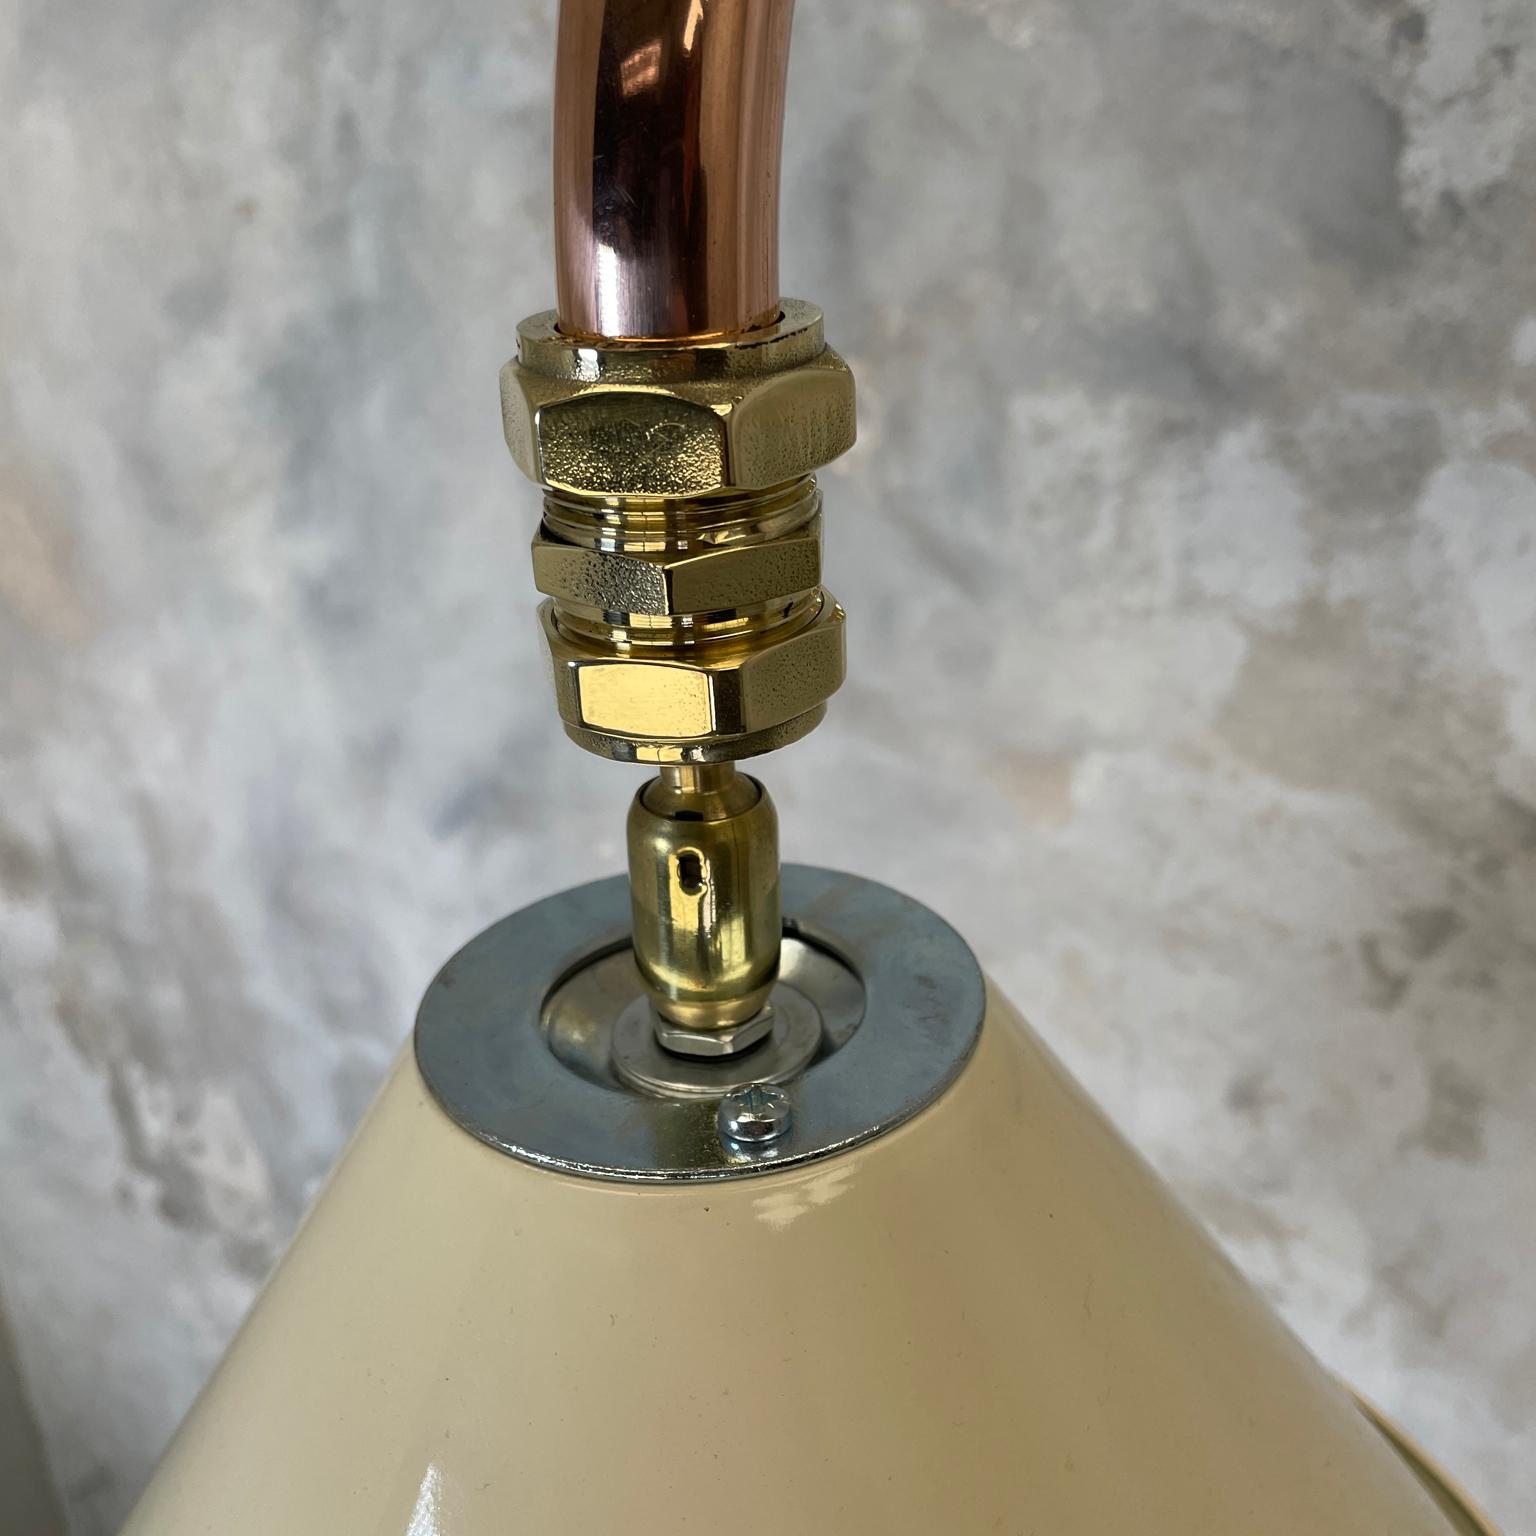 1980's Copper & Brass Cantilever Lamp Cream British Army Lamp Shade For Sale 5